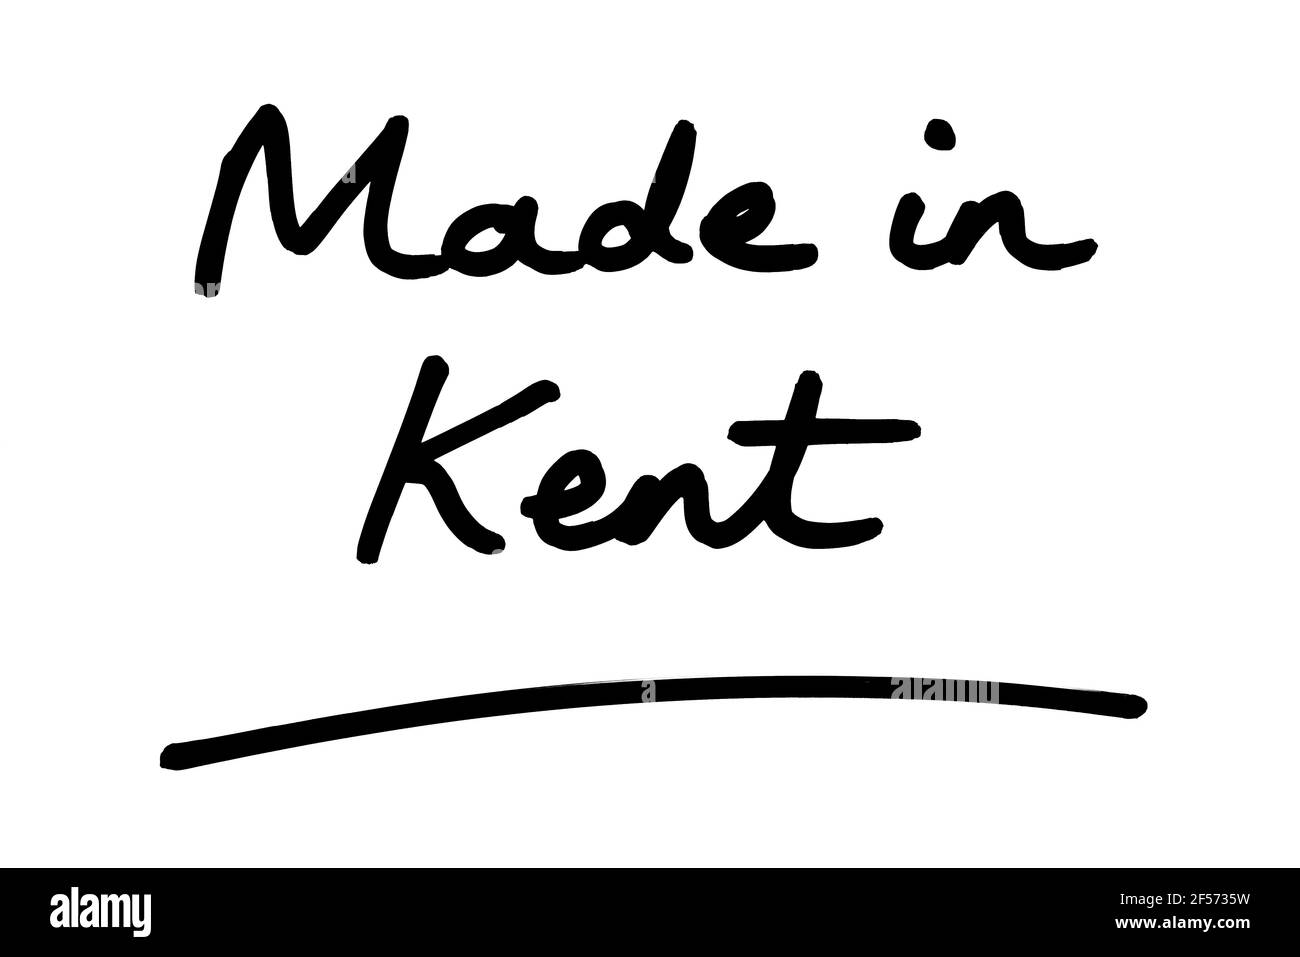 Made in Kent, handwritten on a white background. Stock Photo